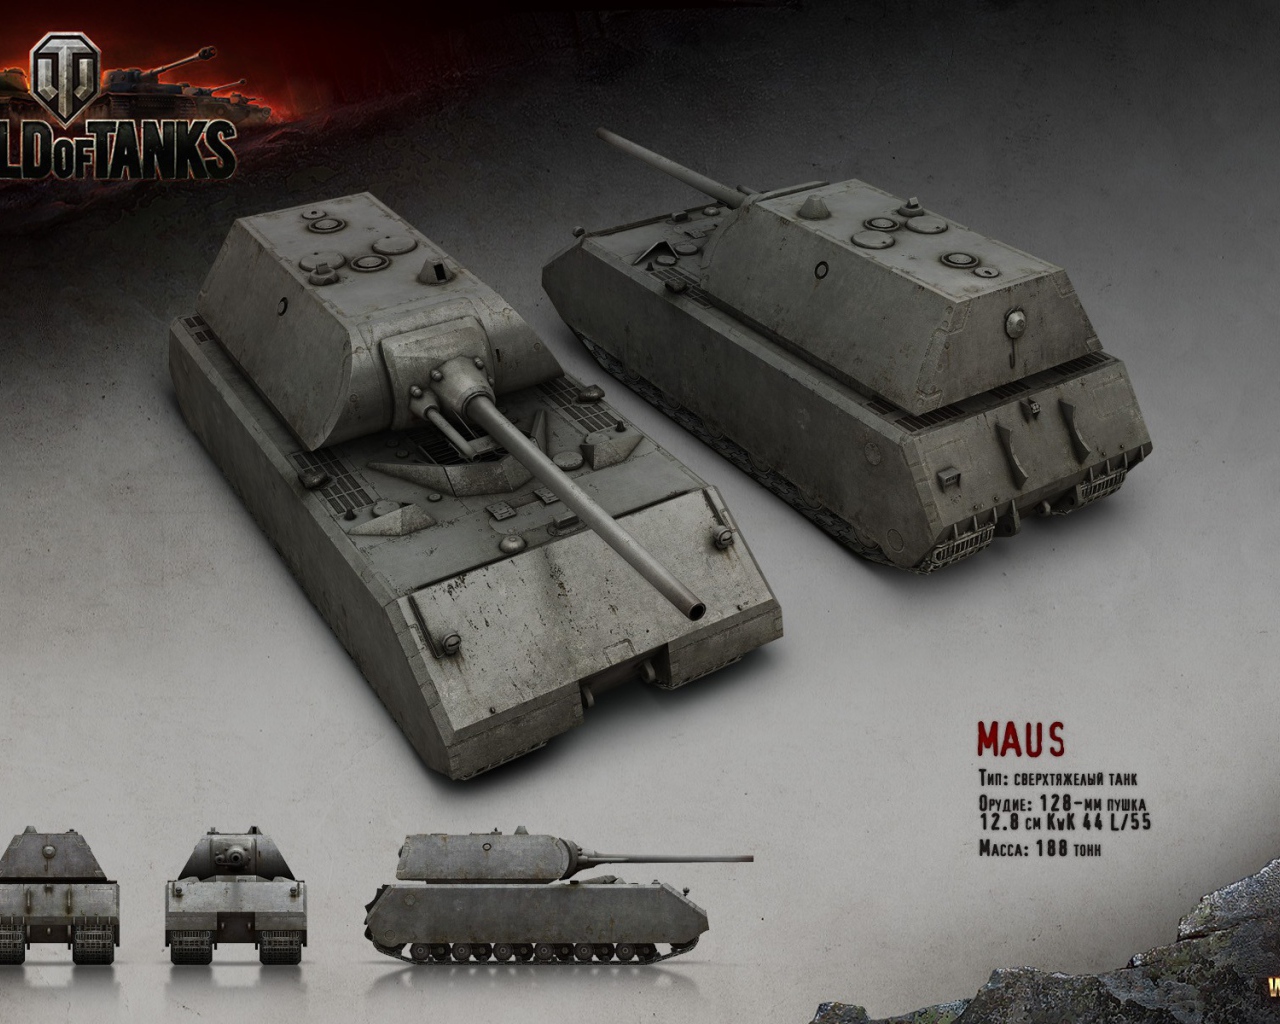 Super-heavy tank Maus, the game World of Tanks